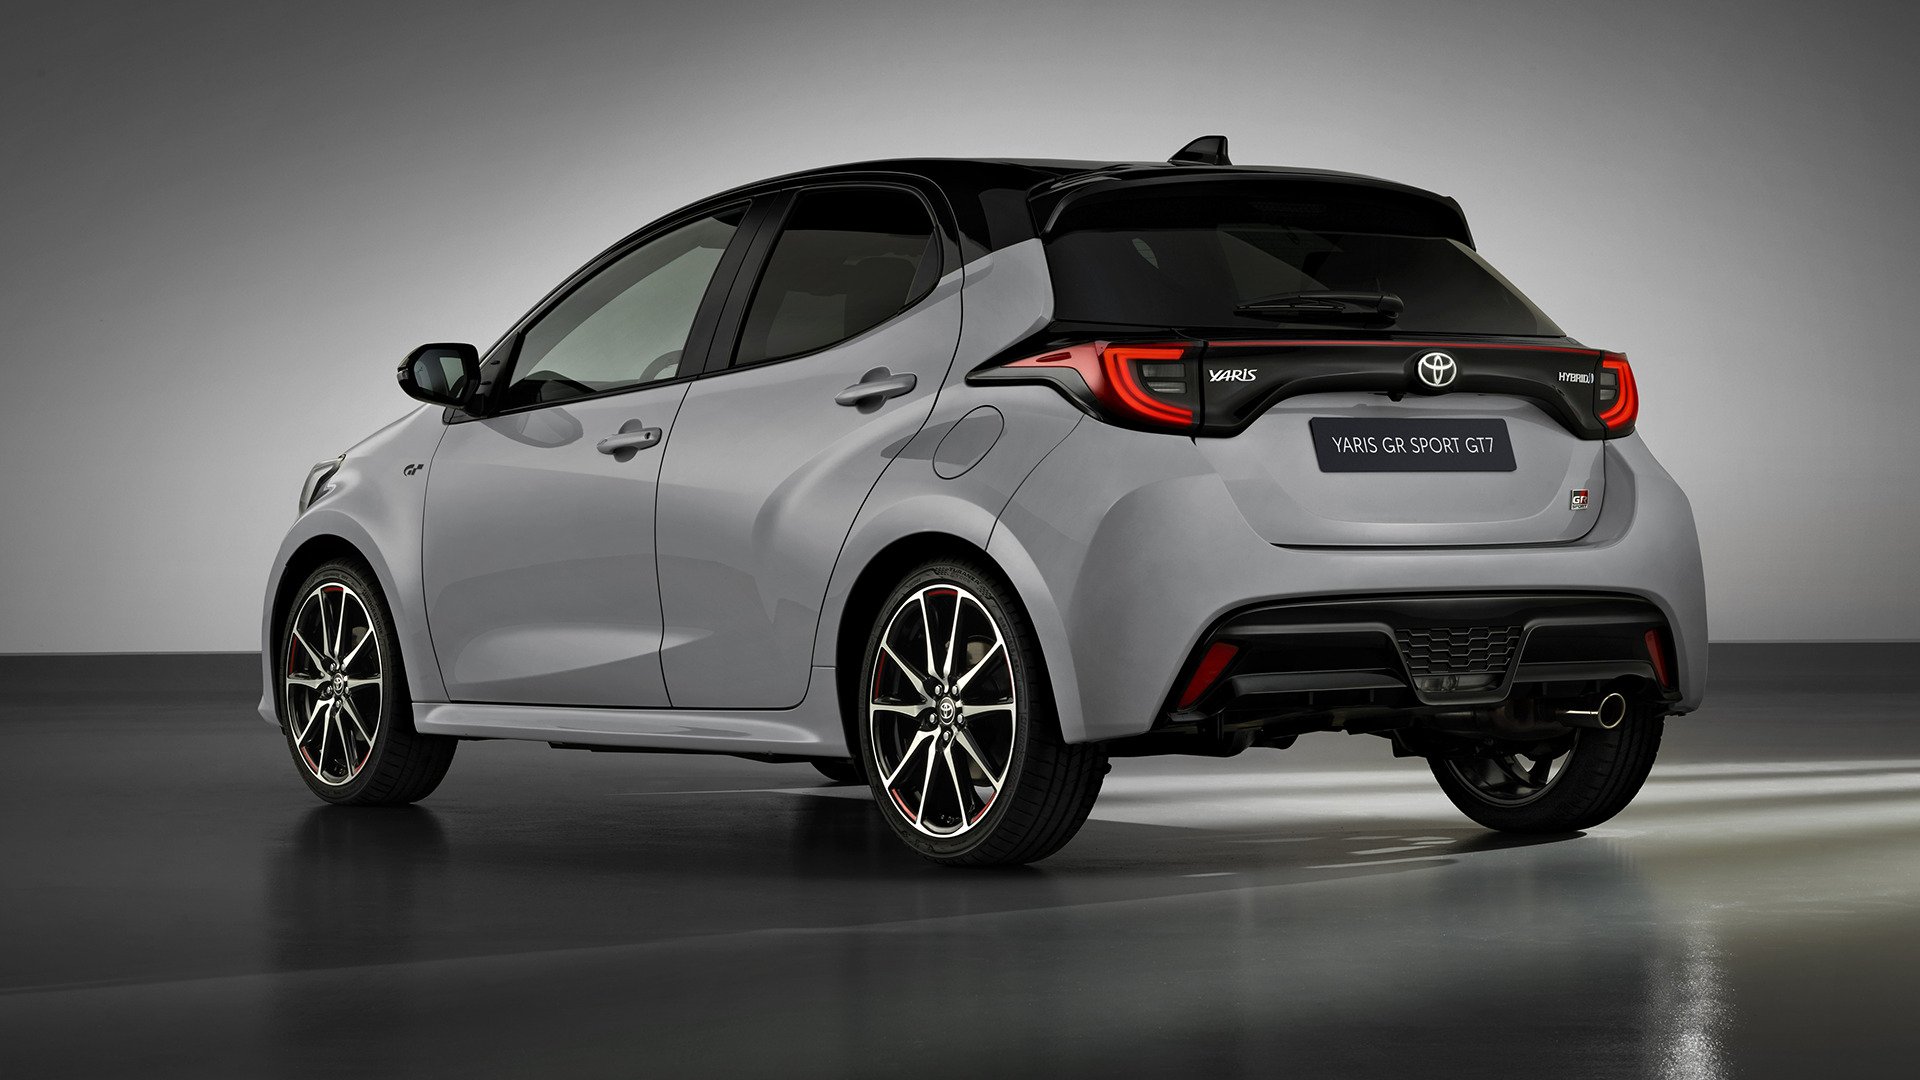 Gran Turismo 7 Special Edition Toyota Yaris Revealed, Limited to 100 Units  – GTPlanet